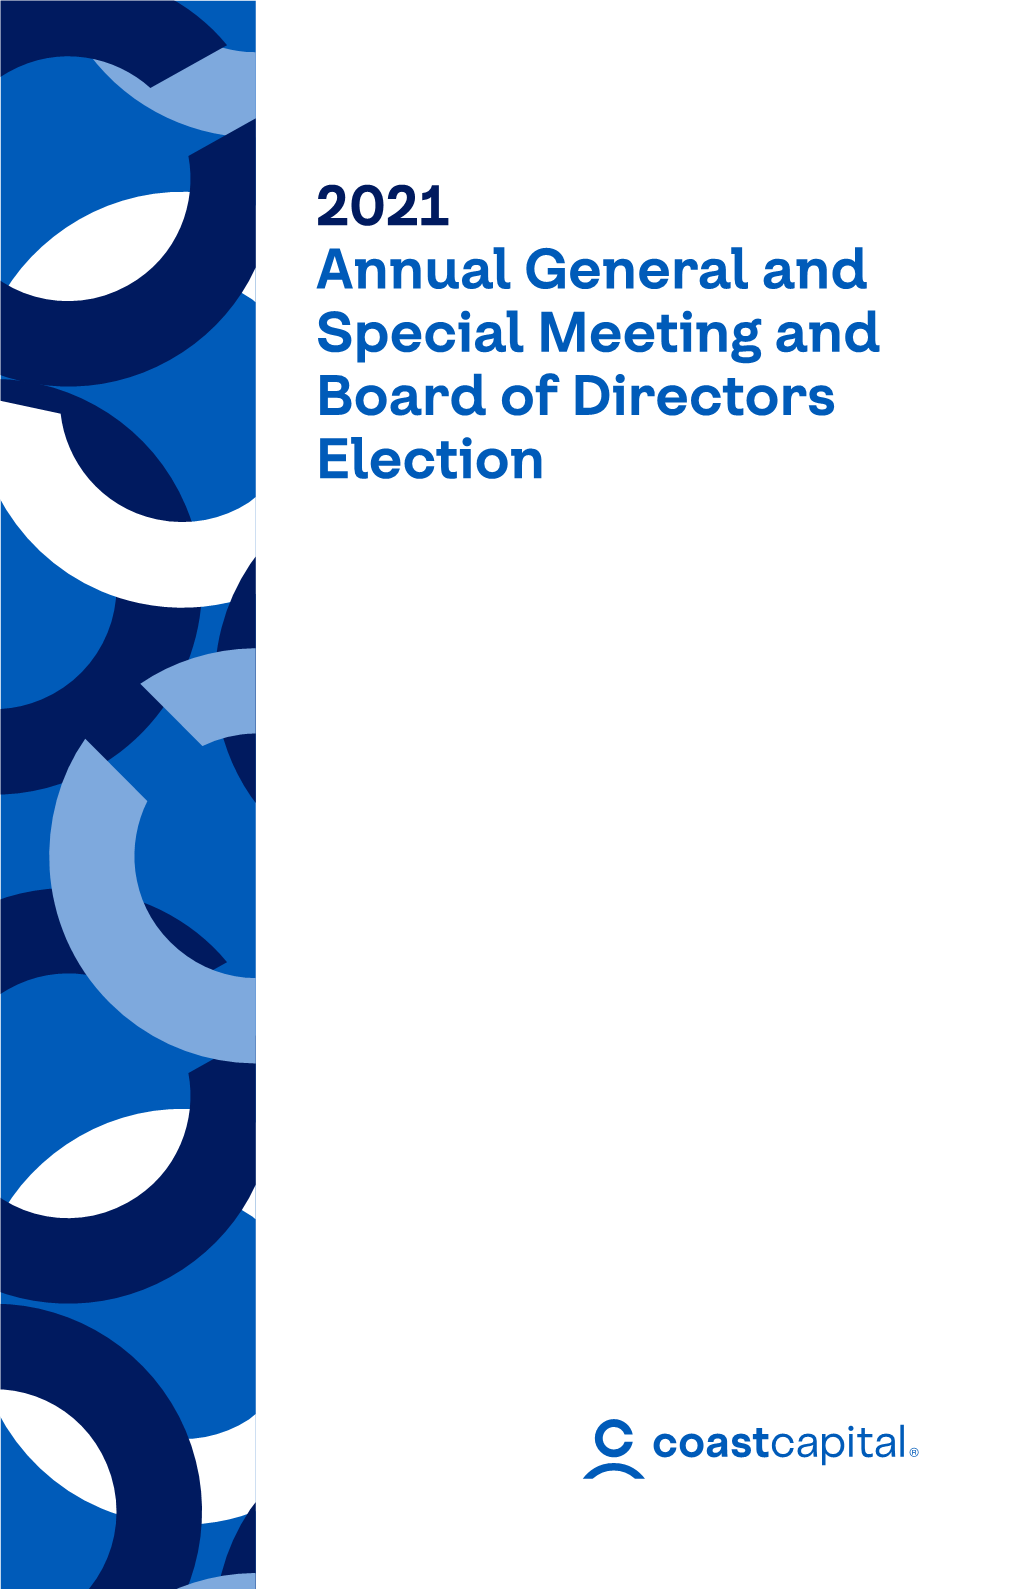 2021 Annual General and Special Meeting and Board of Directors Election